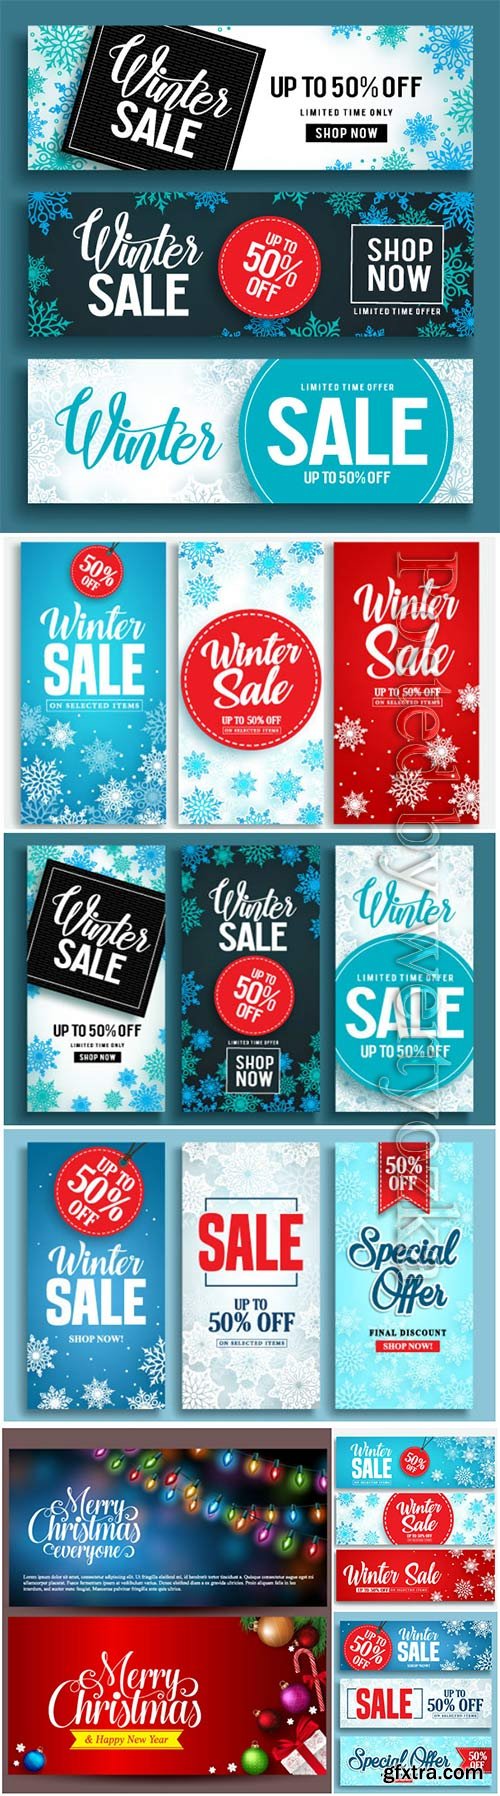 Winter sale vector banner set with discount text